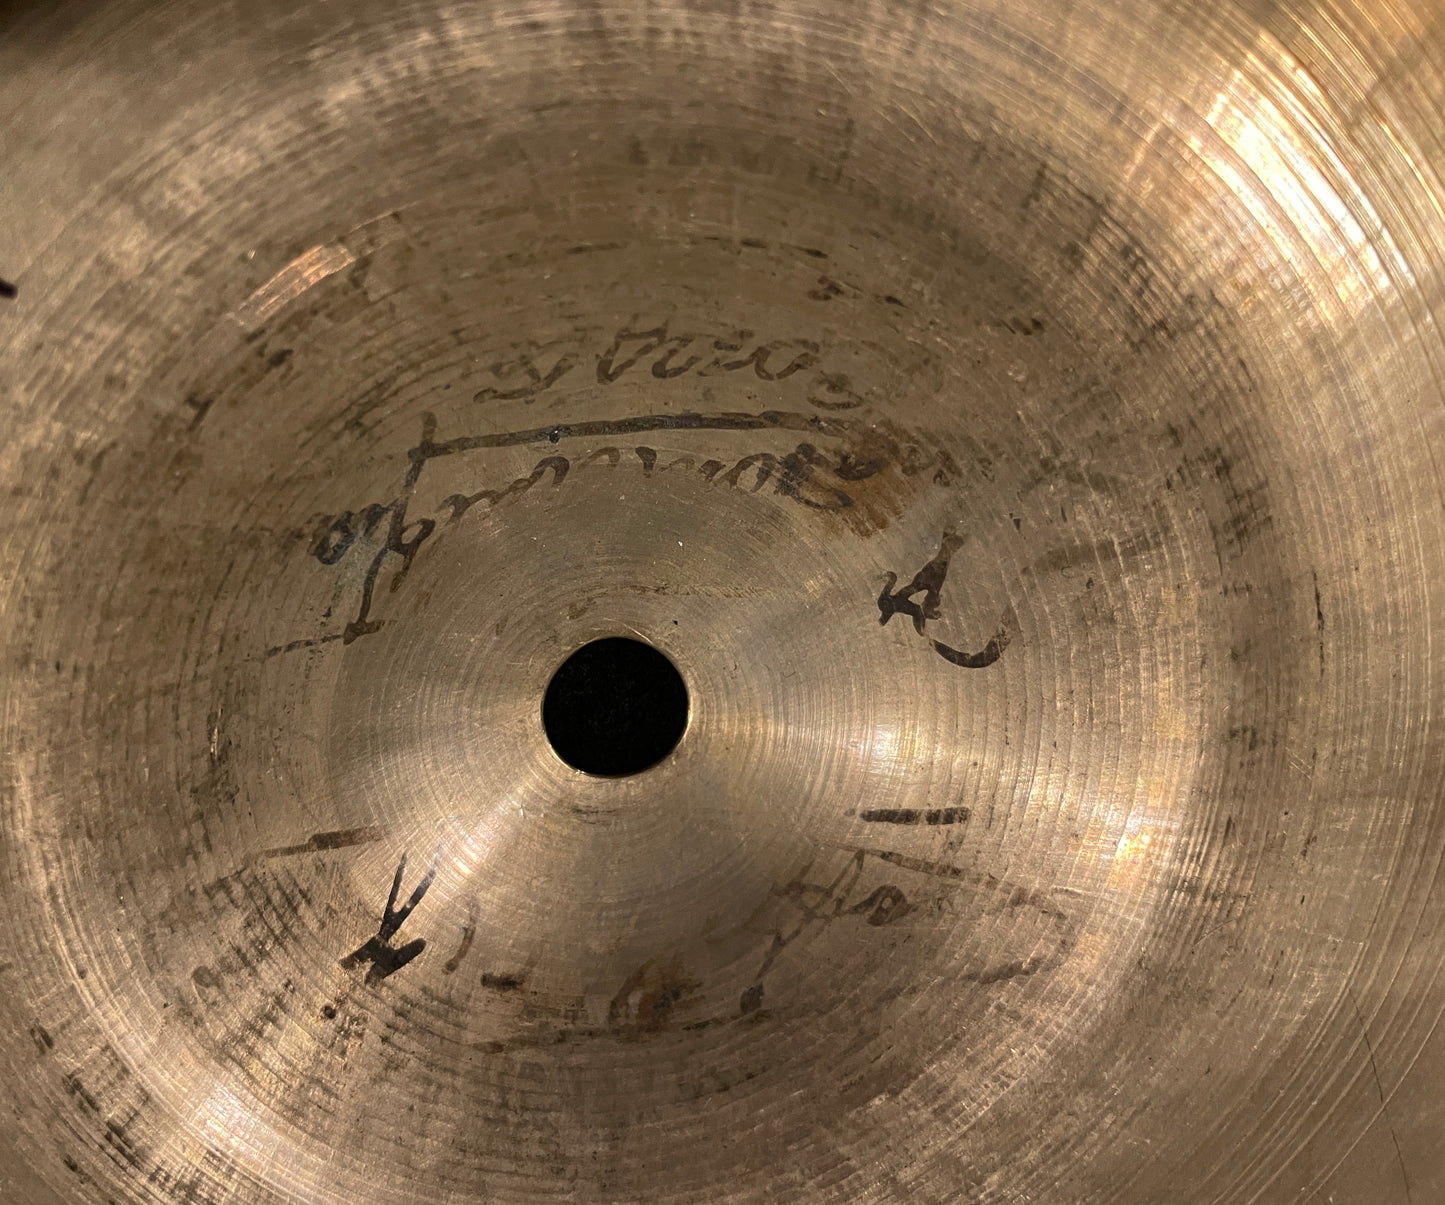 14" K Zildjian Early 1900s Constantinople "Stamp 0" Small Ride / Trap Cymbal 1246g #202